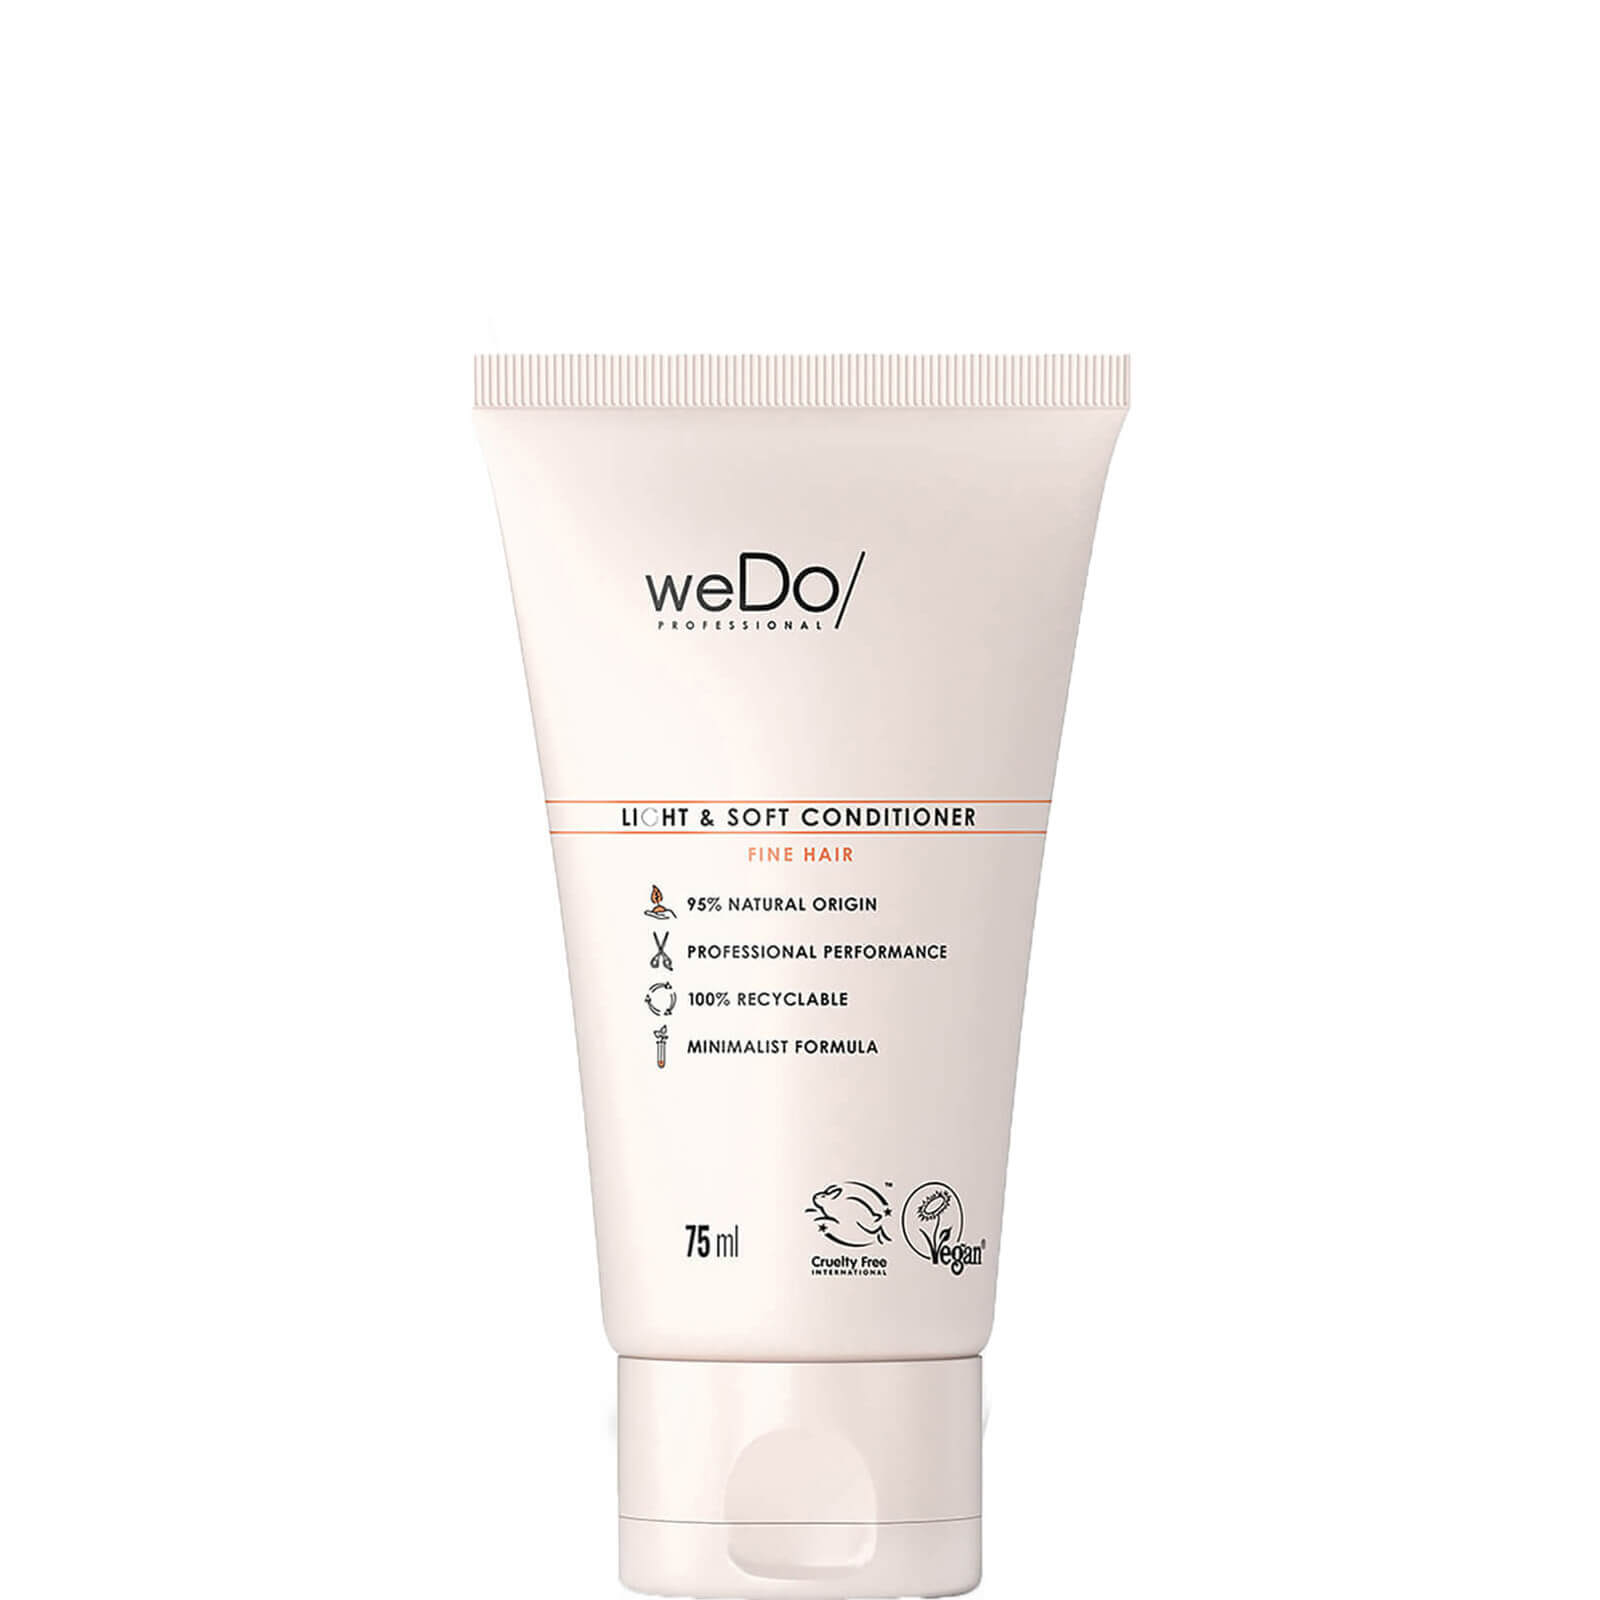 Photos - Hair Product weDo/ Professional Light and Soft Conditioner 75ml 99350065110